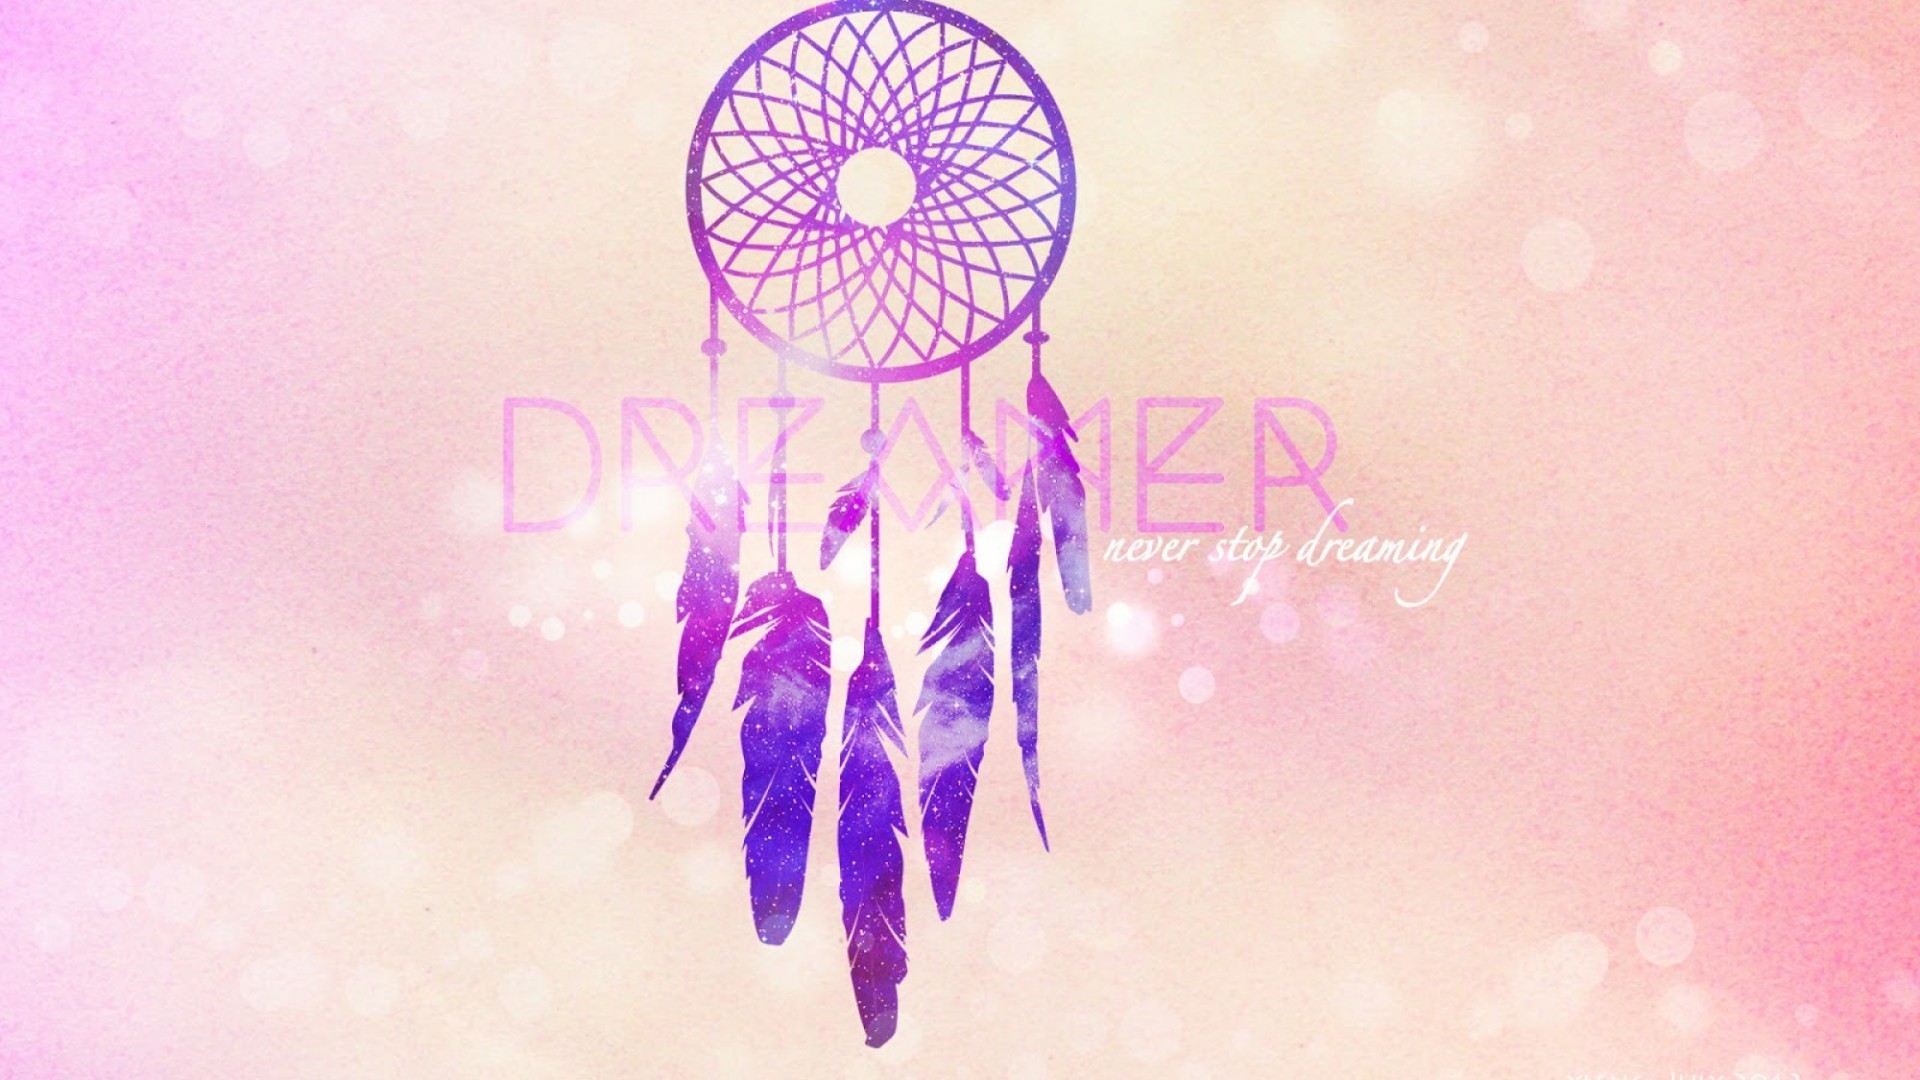 1920x1080 1920x1200 Dreamcatcher For Android Wide Wallpapers High Resolution  Wallpapers 1920x1200 px 131.89 KB